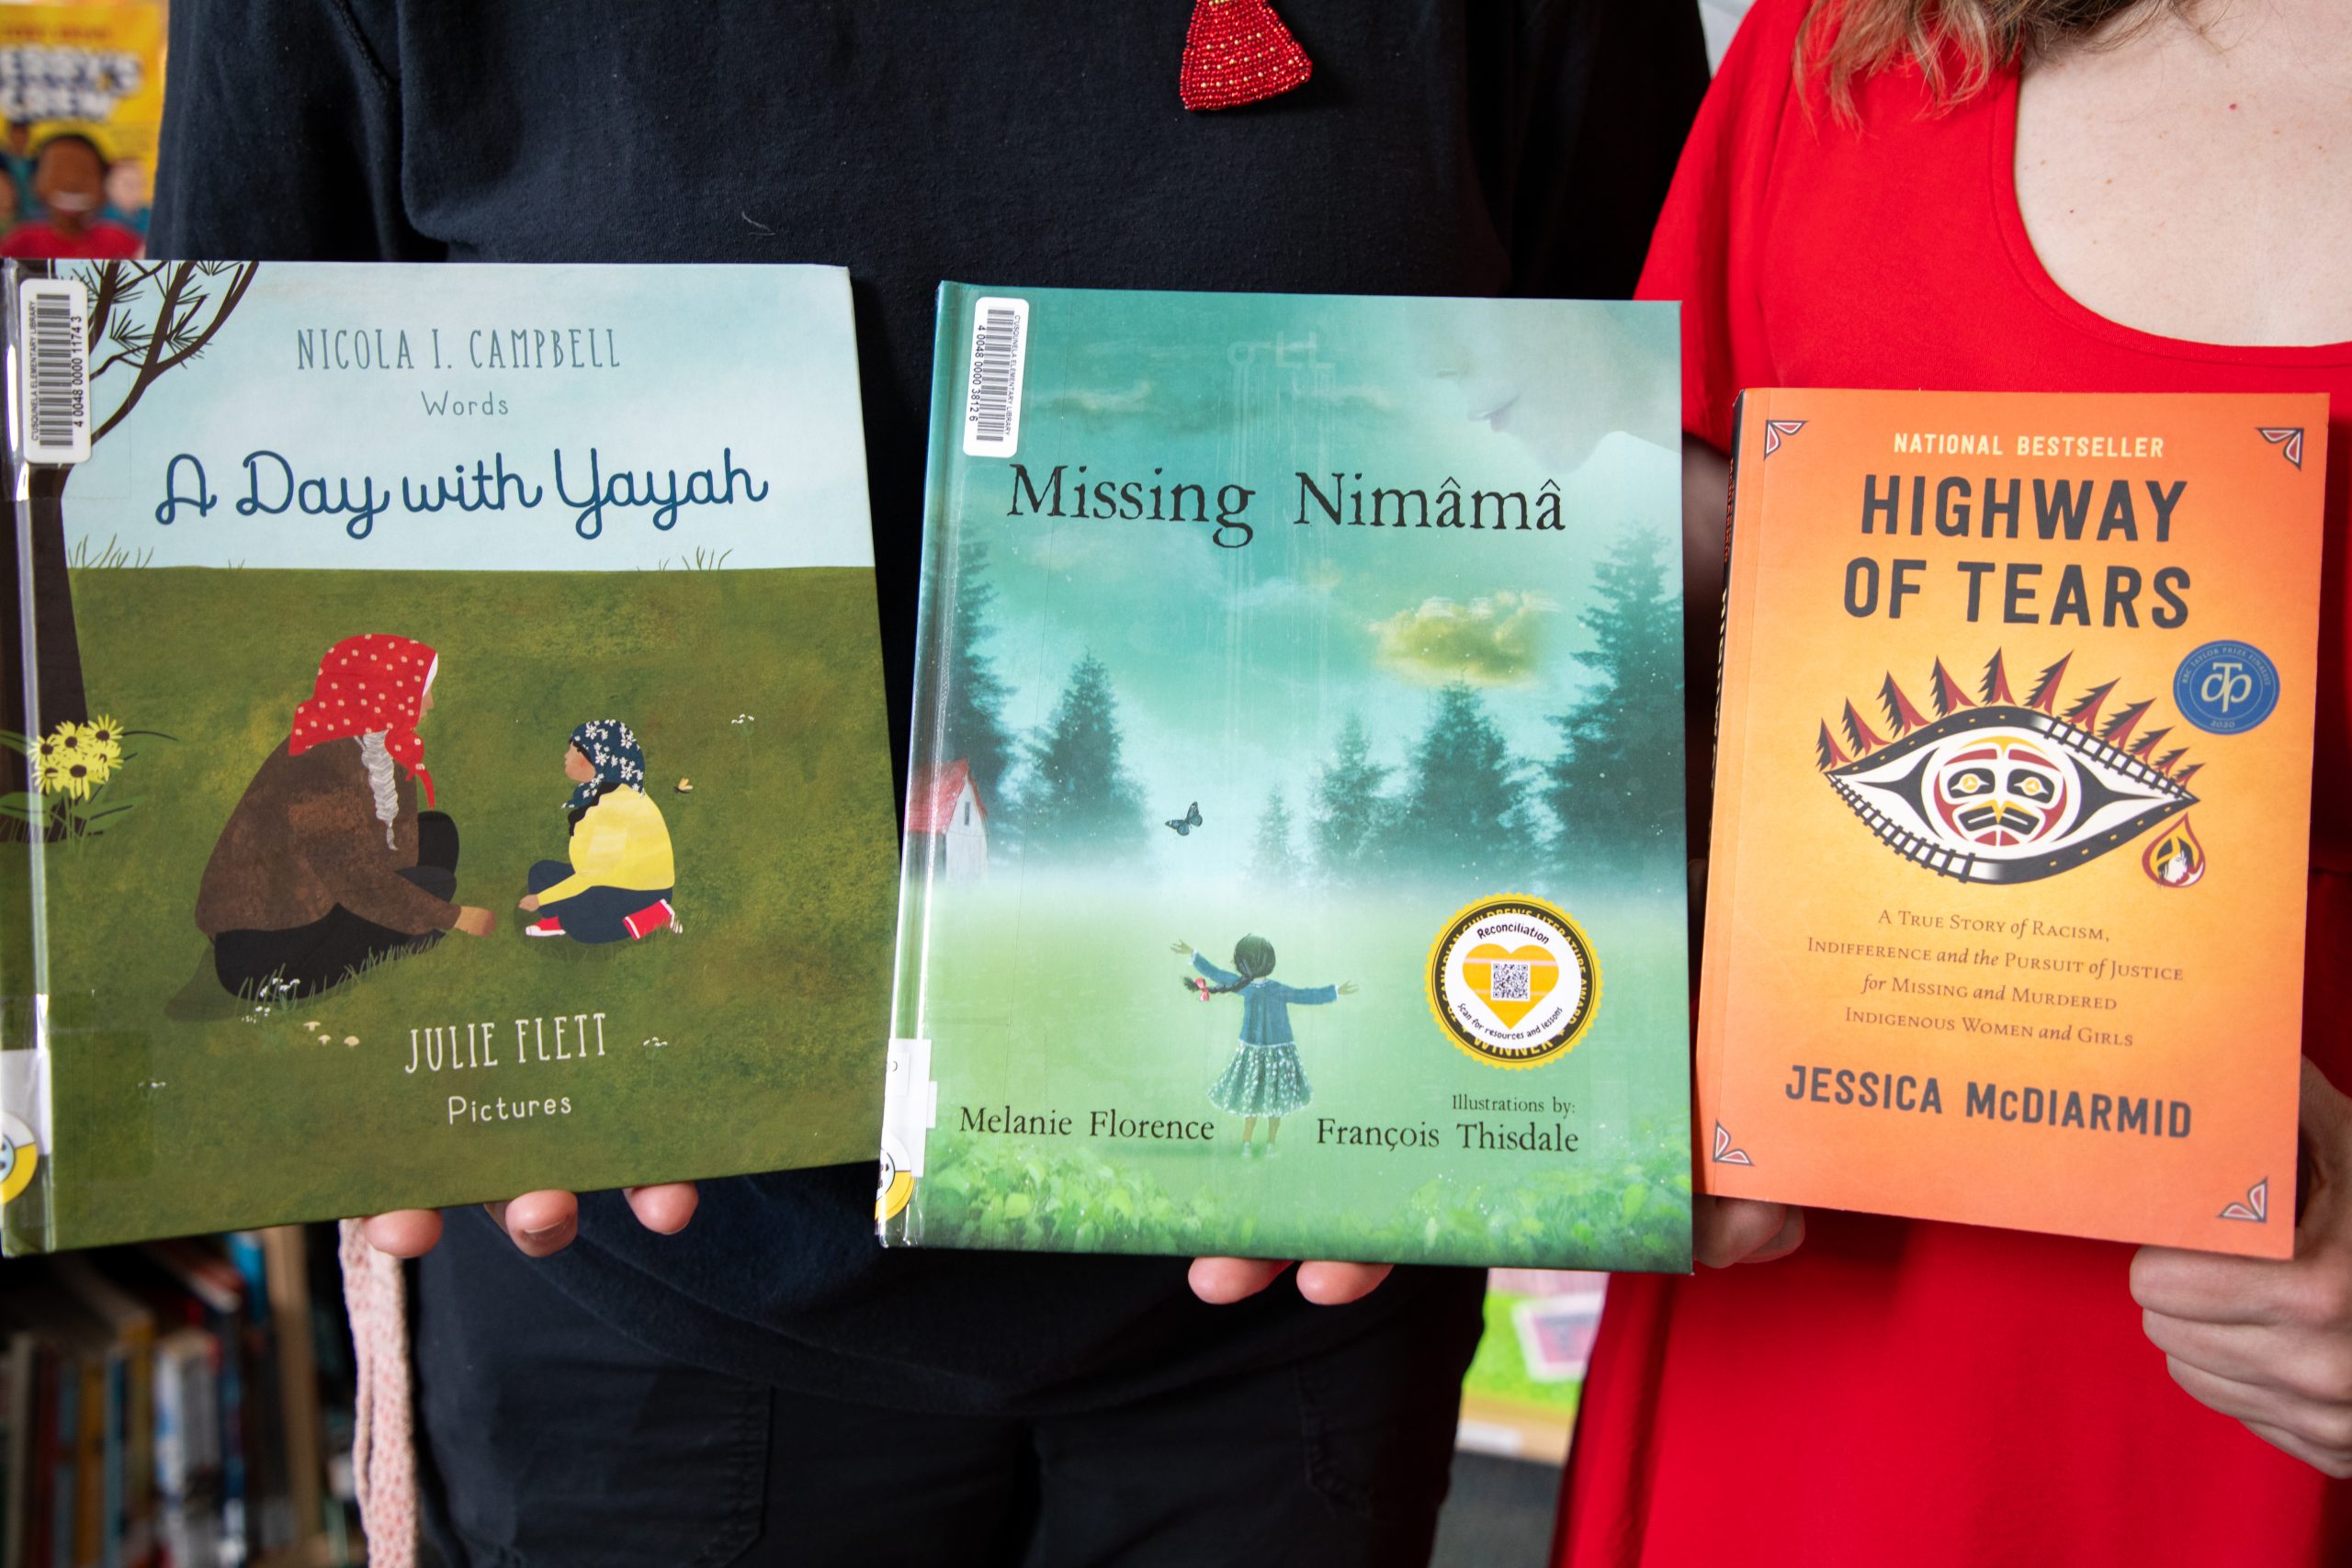 SD42 Aboriginal support worker Melinda Mouland and c̓əsqənelə Elementary teacher-librarian Janet Smith hold up "A Day with Yayah" by Nicola I. Campbell, "Missing Nimama" by Melanie Florence, and "Highway of Tears" by Jessica McDiarmid.